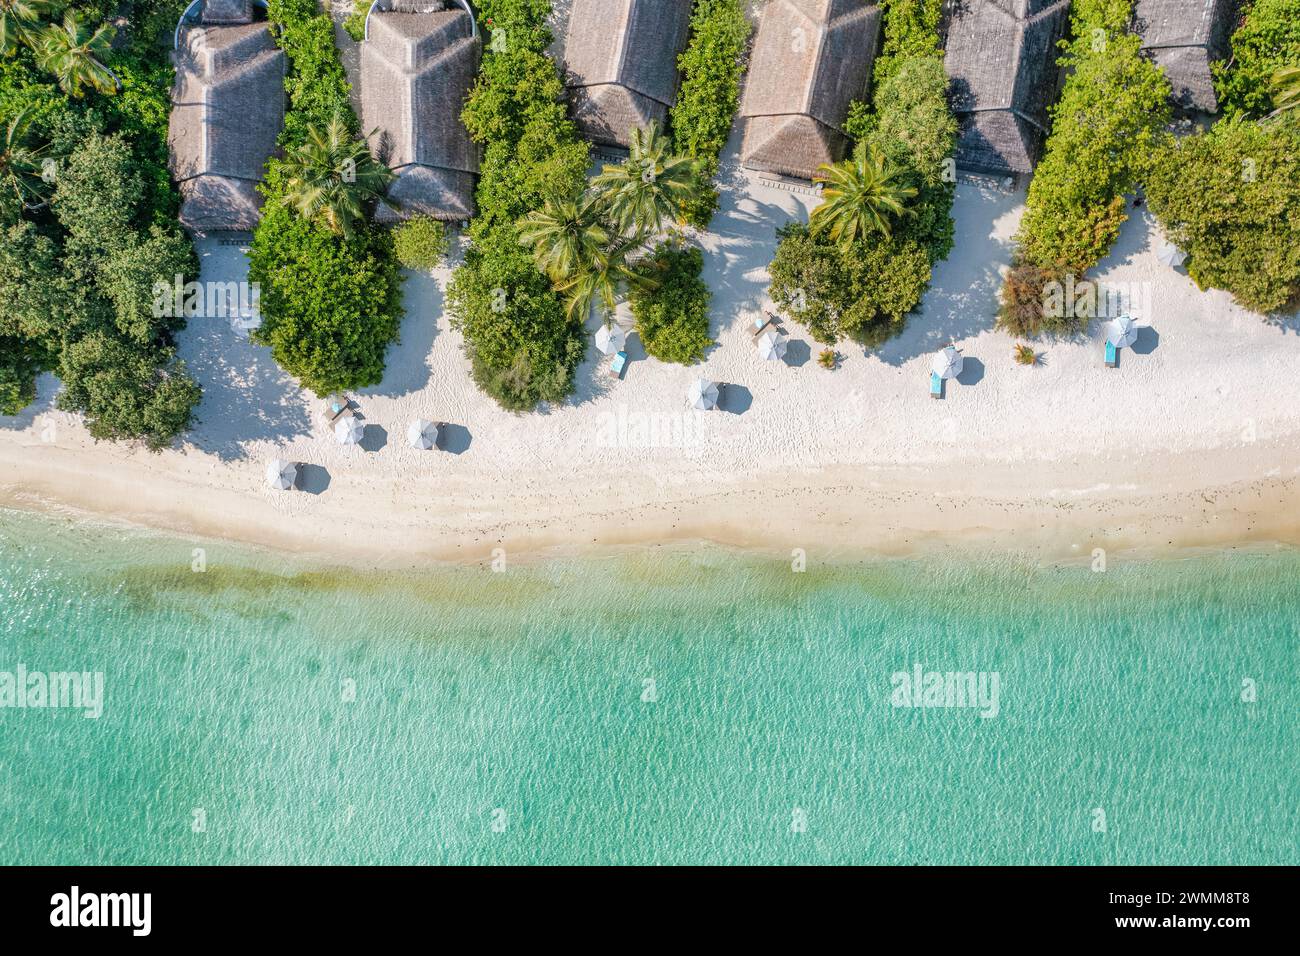 Amazing atoll island in Maldives luxury villas from aerial view. Tranquil tropical landscape seascape. Palm trees white sandy beach, peaceful nature Stock Photo